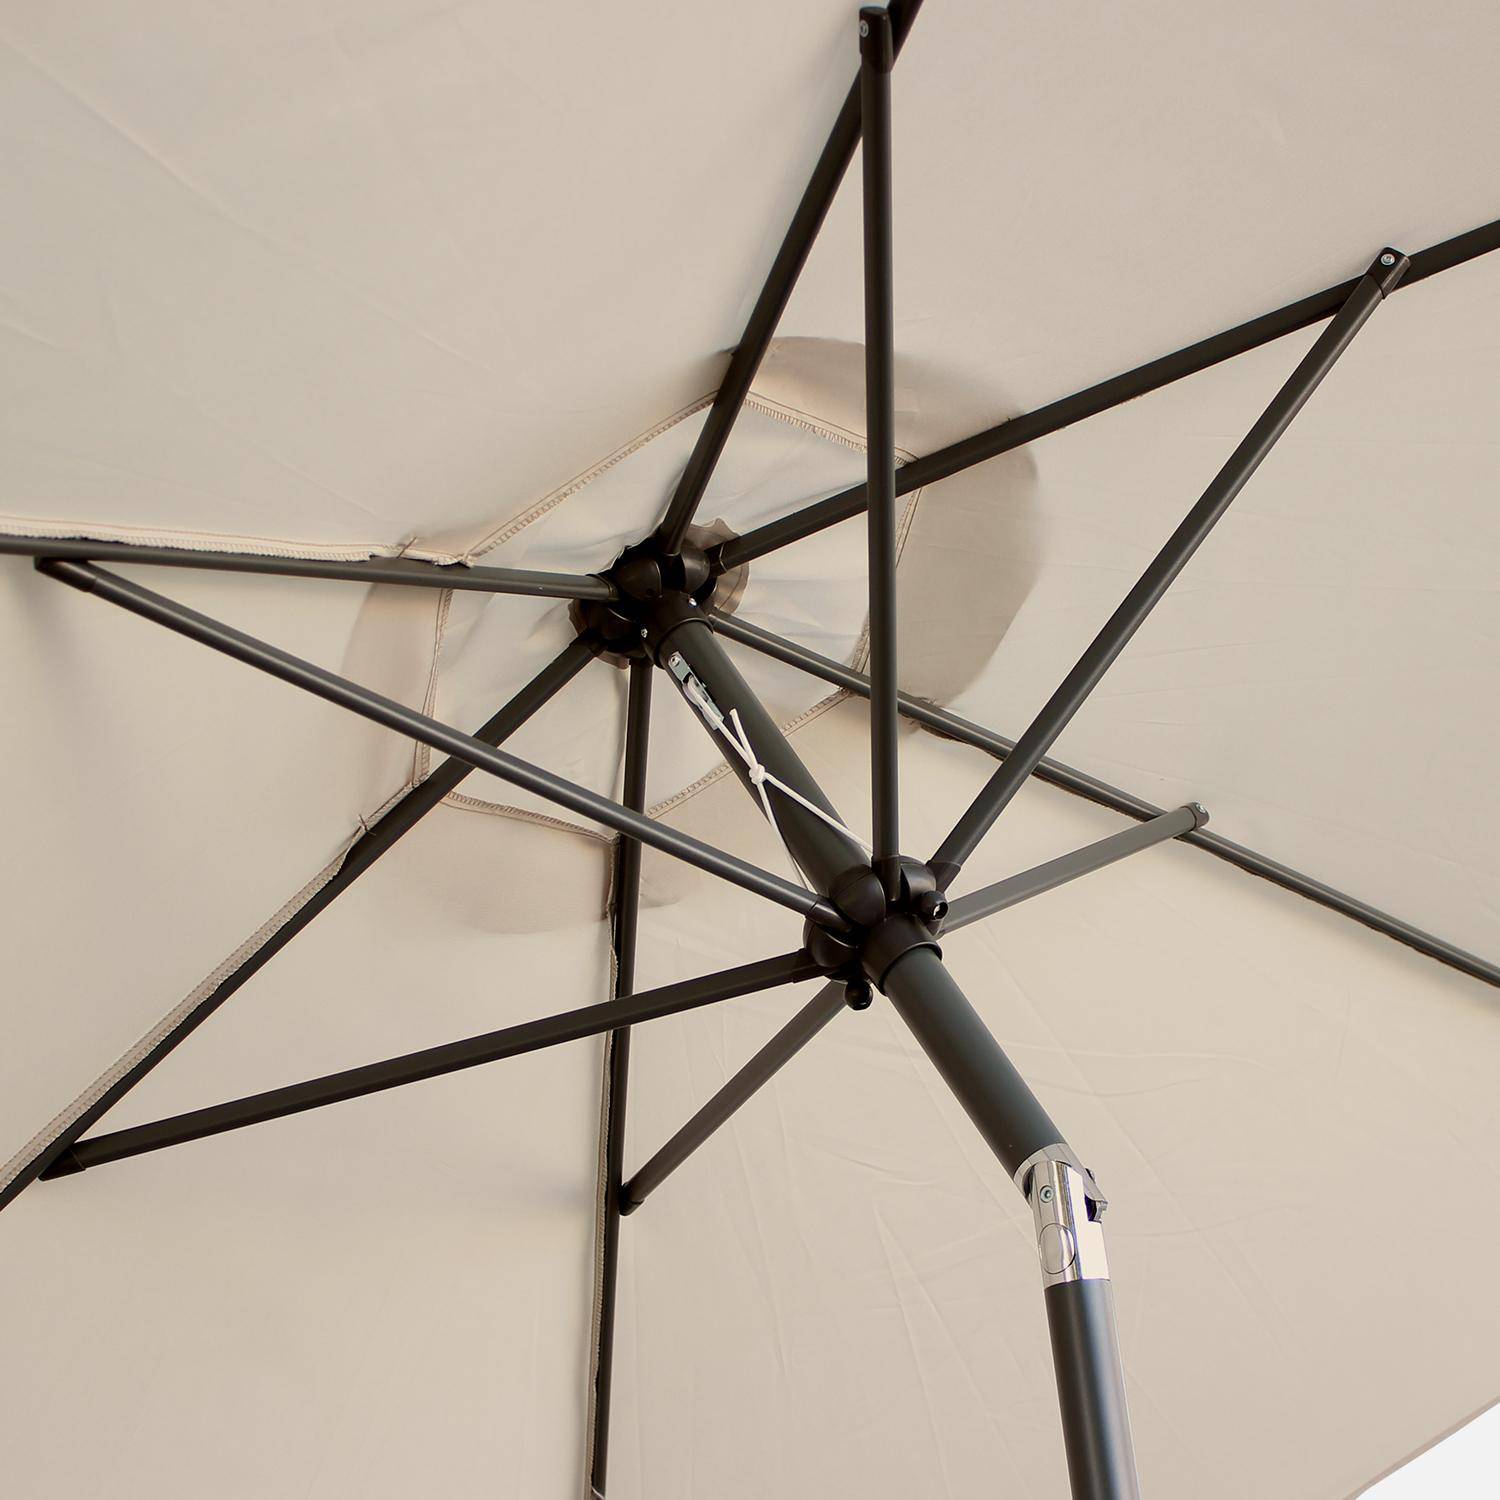 3m round centre pole parasol - adjustable aluminium central mast and crank handle opening - Touquet - Sand,sweeek,Photo5